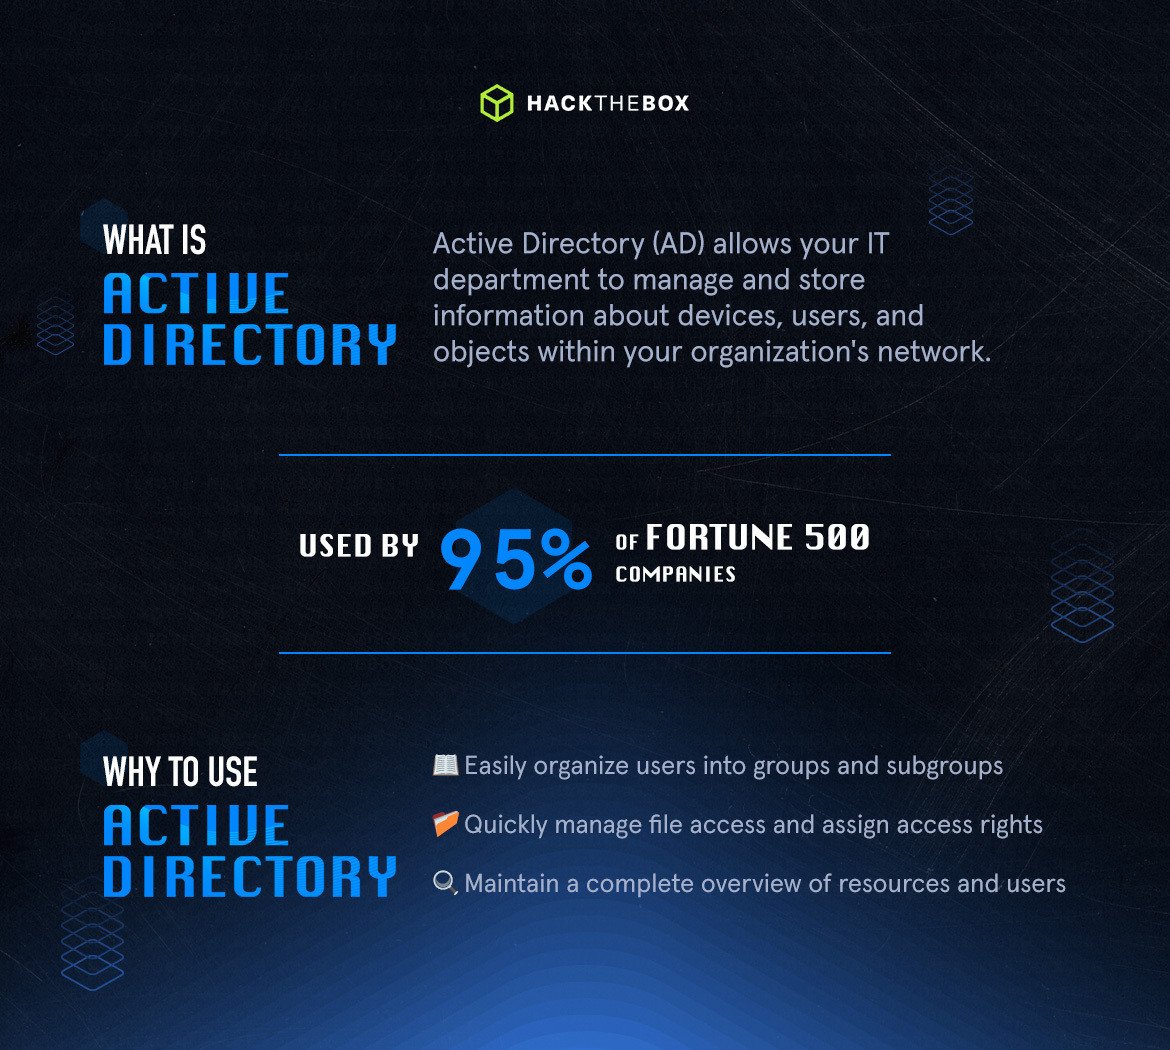 Active Directory and Fortune 500